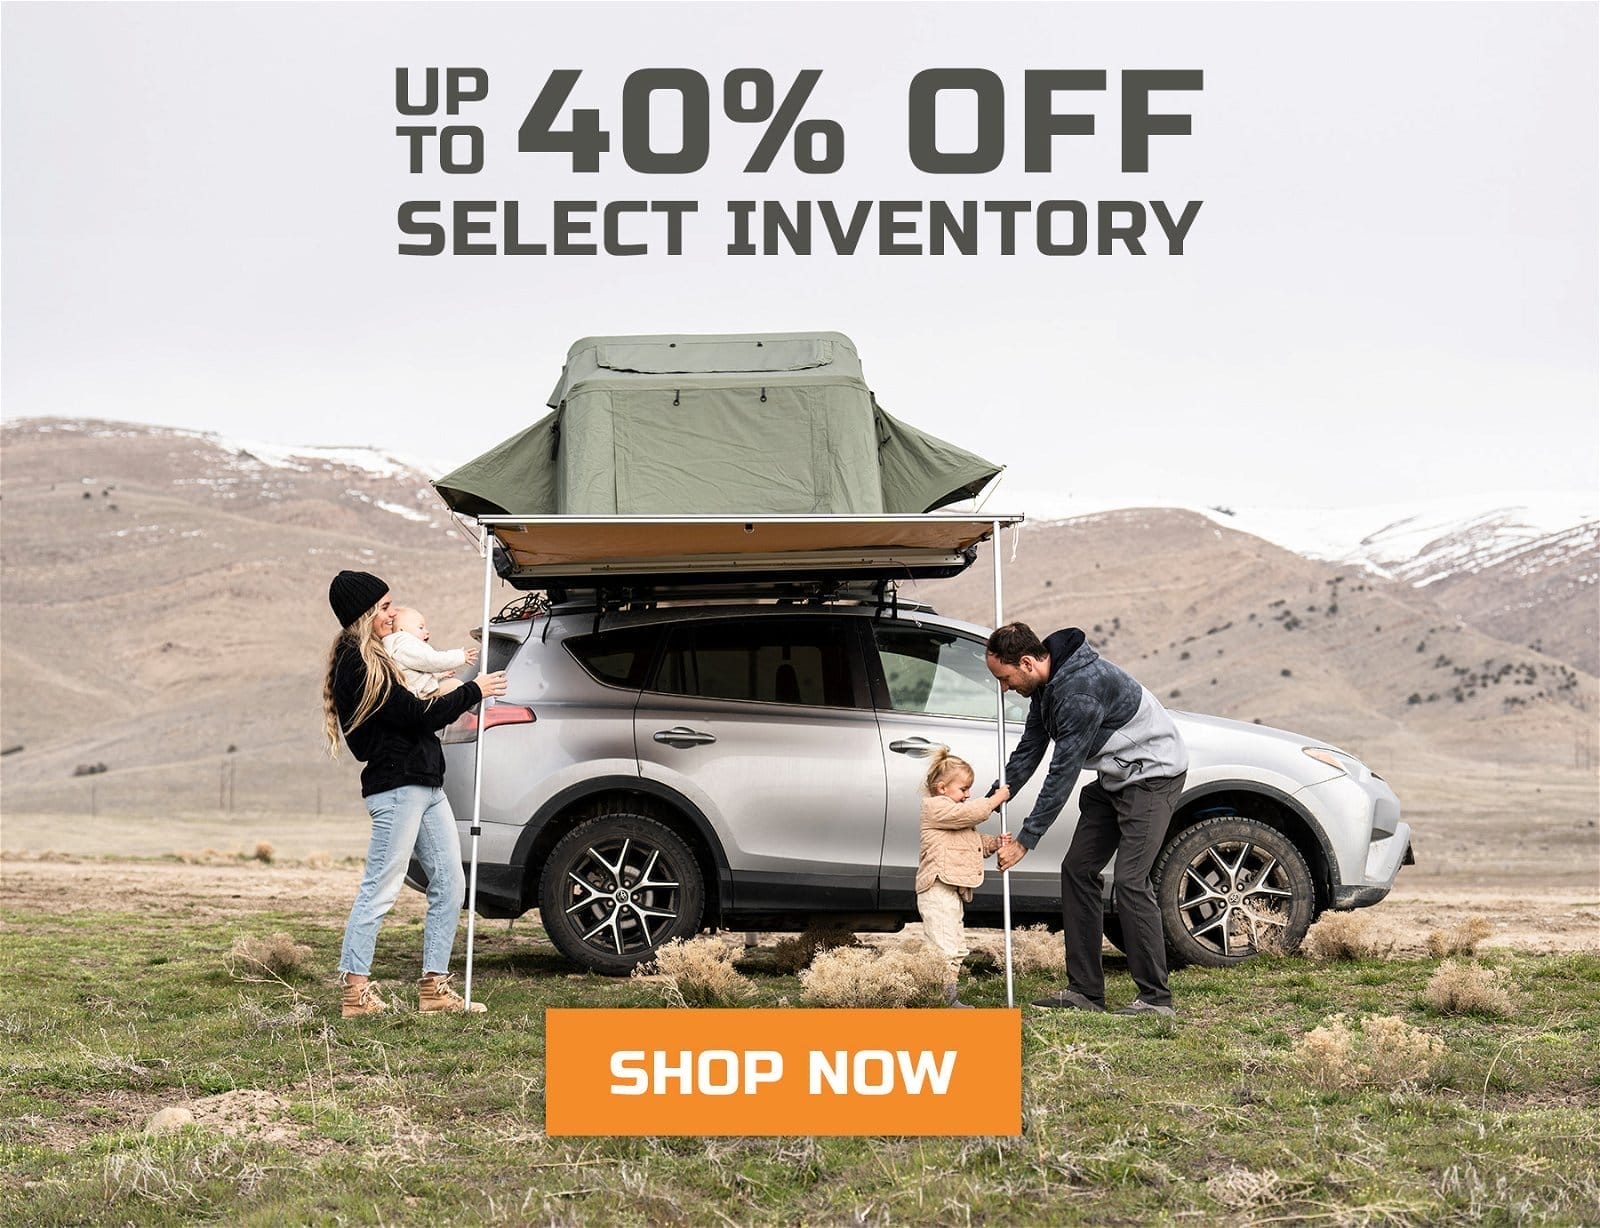 Up to 40% off select inventory.